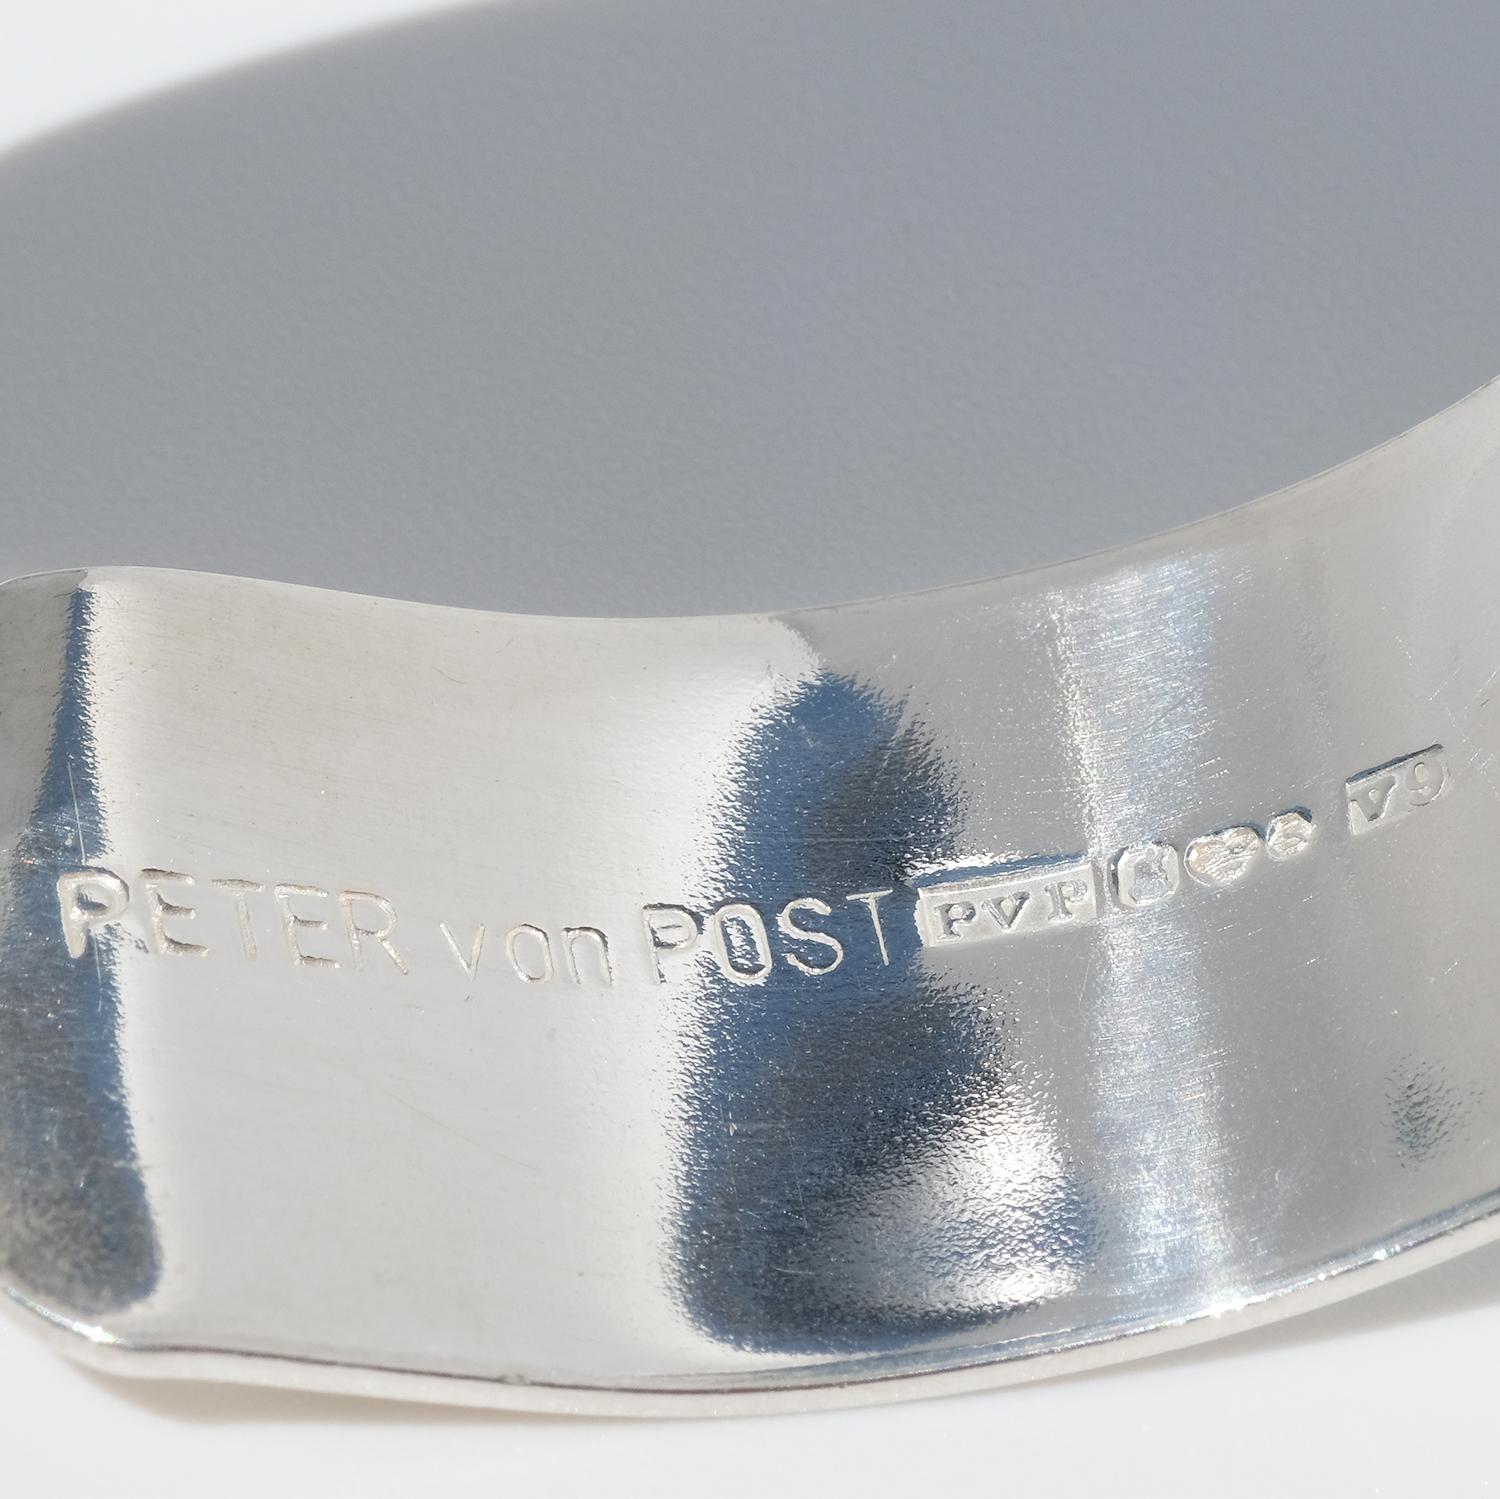 Vintage Silver Cuff Bracelet by Swedish Master Peter Von Post Made Year, 1971 For Sale 1